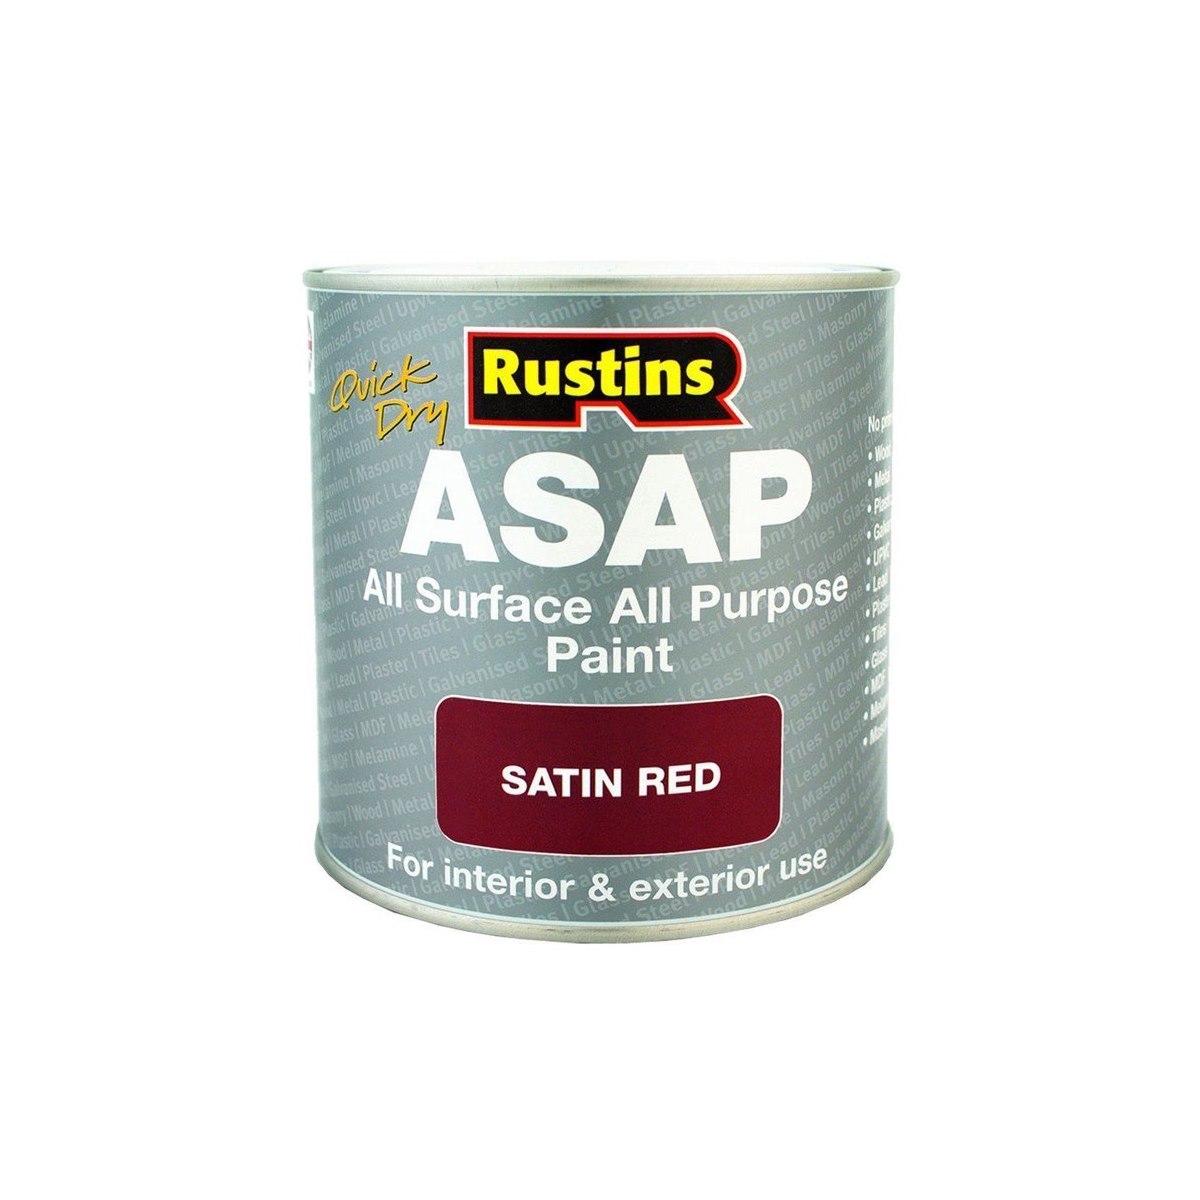 Rustins Quick Dry All Surface All Purpose Paint (ASAP) Red 1 Litre